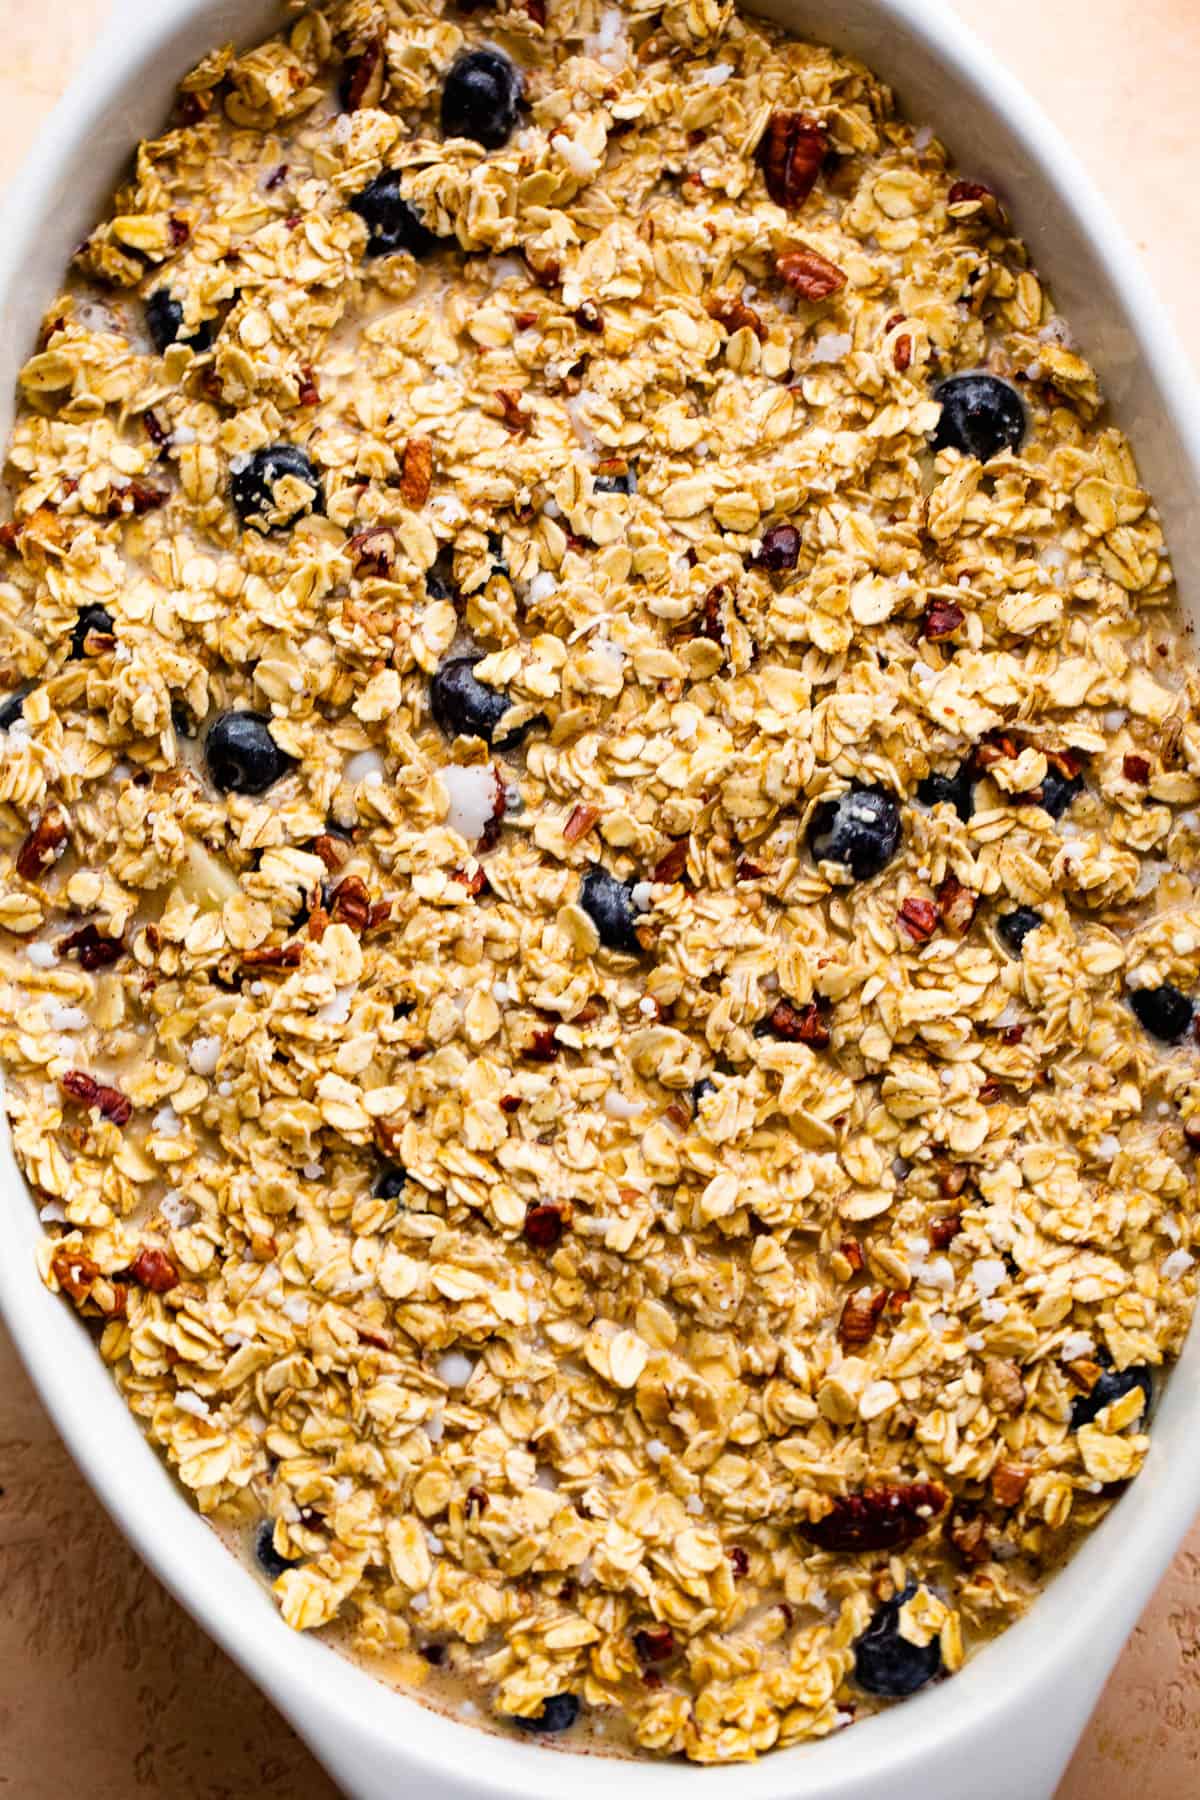 oval baking dish with uncooked oatmeal with berries and apples